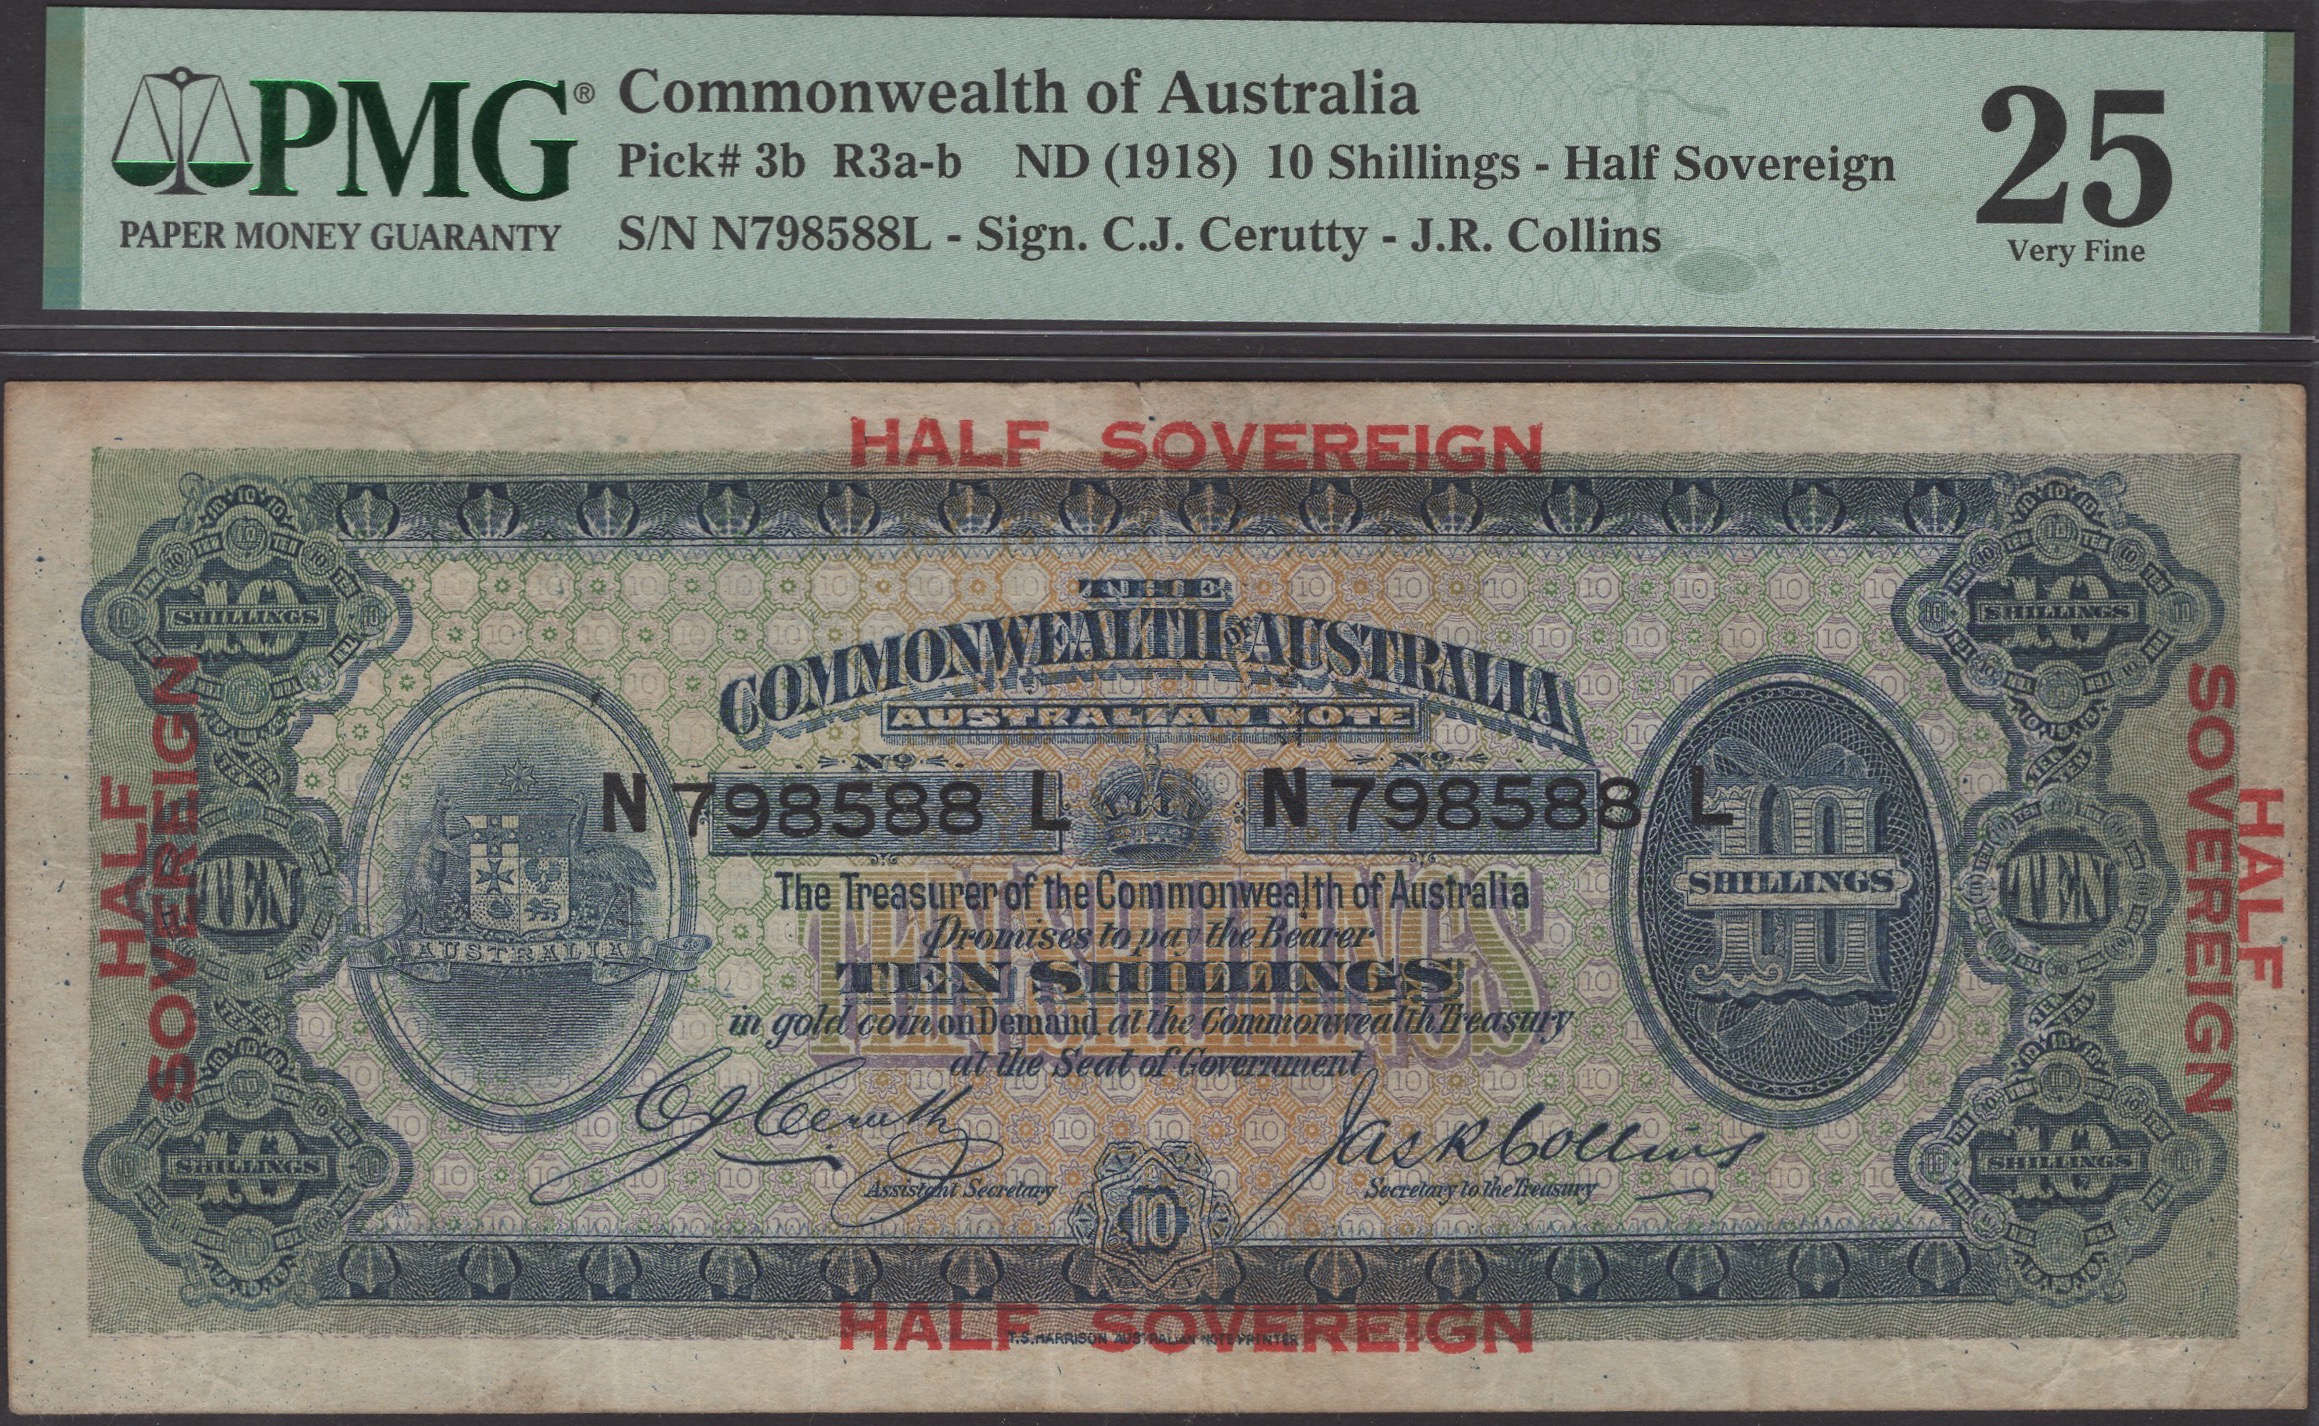 Commonwealth of Australia, 10 Shillings = Half Sovereign, ND (1918), serial number N798588,...